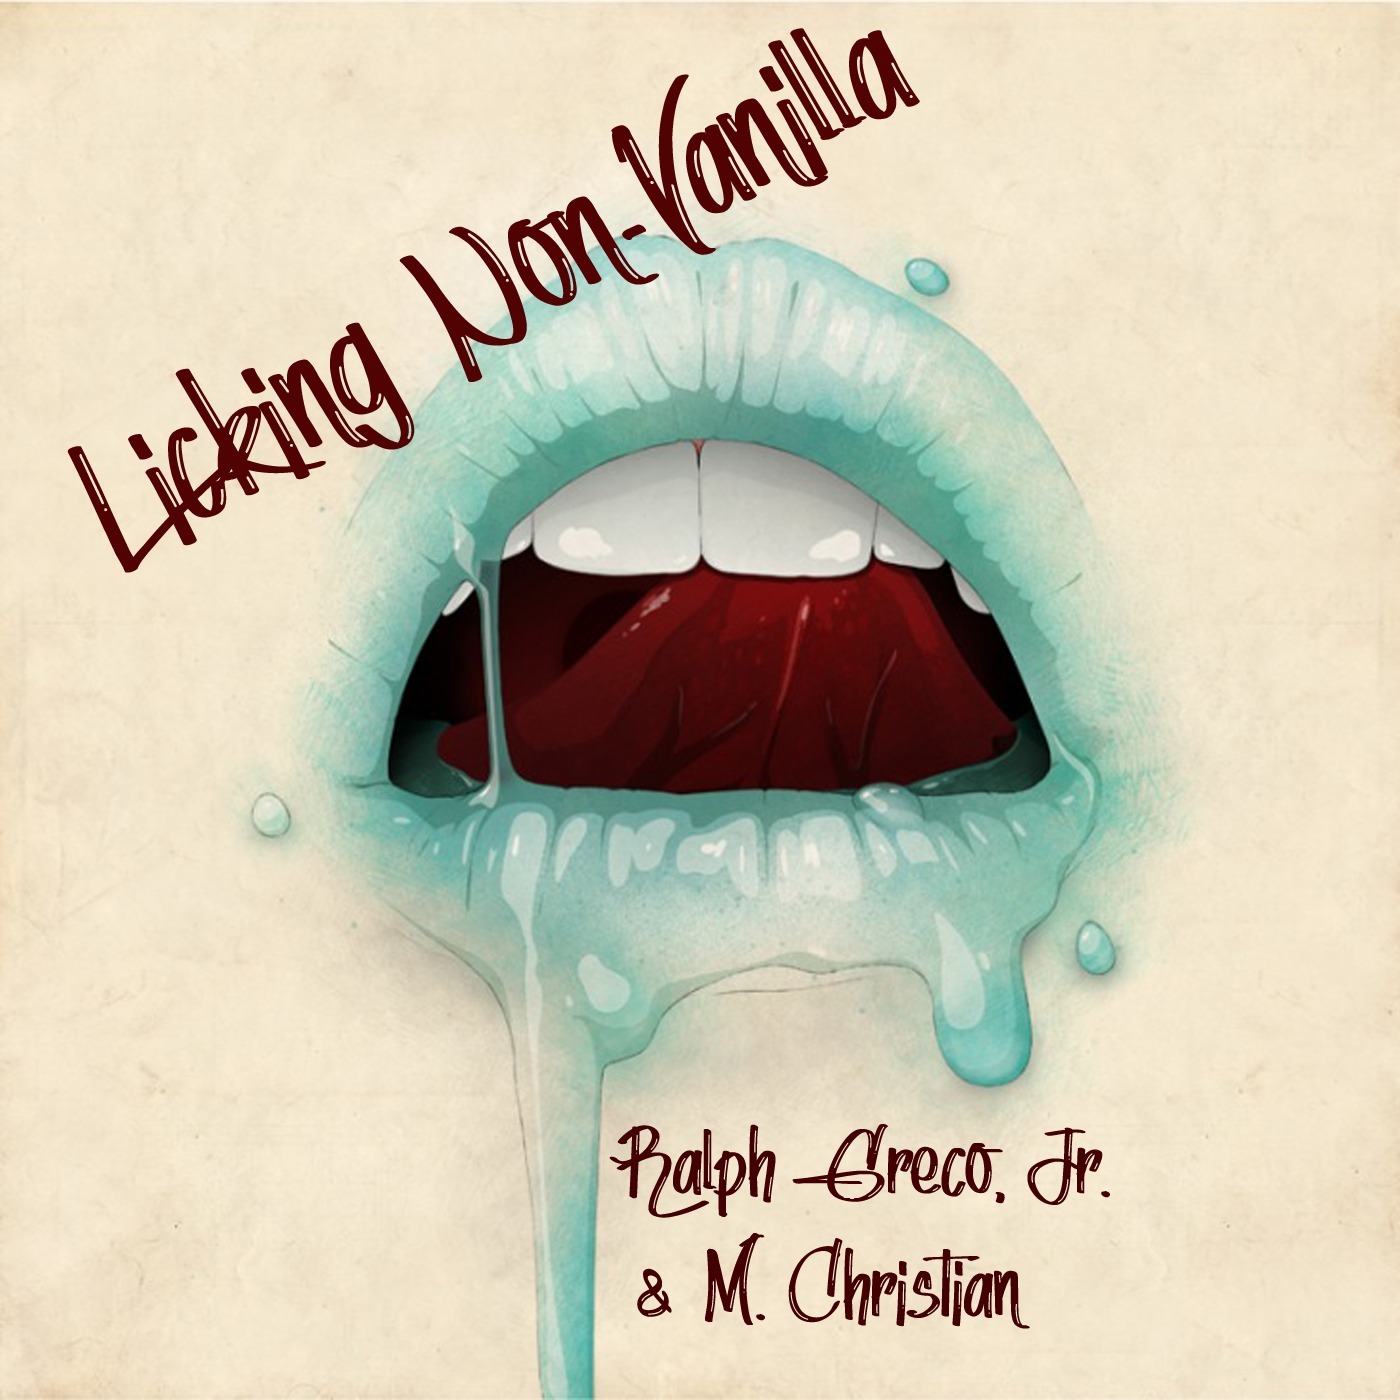 Licking Non-Vanilla - 11-Conversation with Lisa Weinberger of Pearlywrites.com